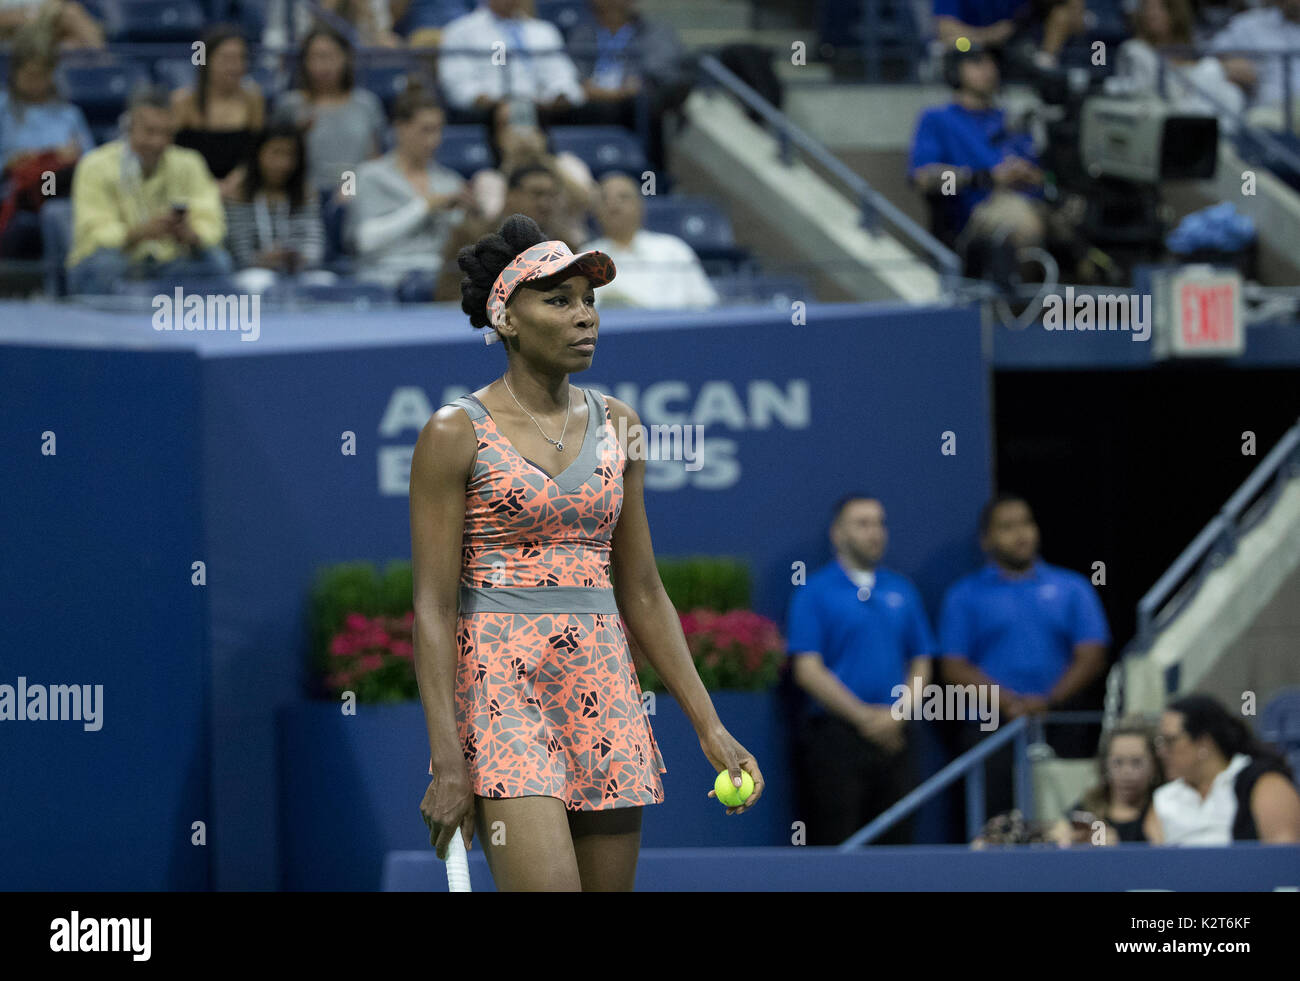 New York, United States. 30th Aug, 2017. Venus Williams of USA reacts during match against Oceane Dodin of France at US Open Championships at Billie Jean King National Tennis Center Credit: Lev Radin/Pacific Press/Alamy Live News Stock Photo